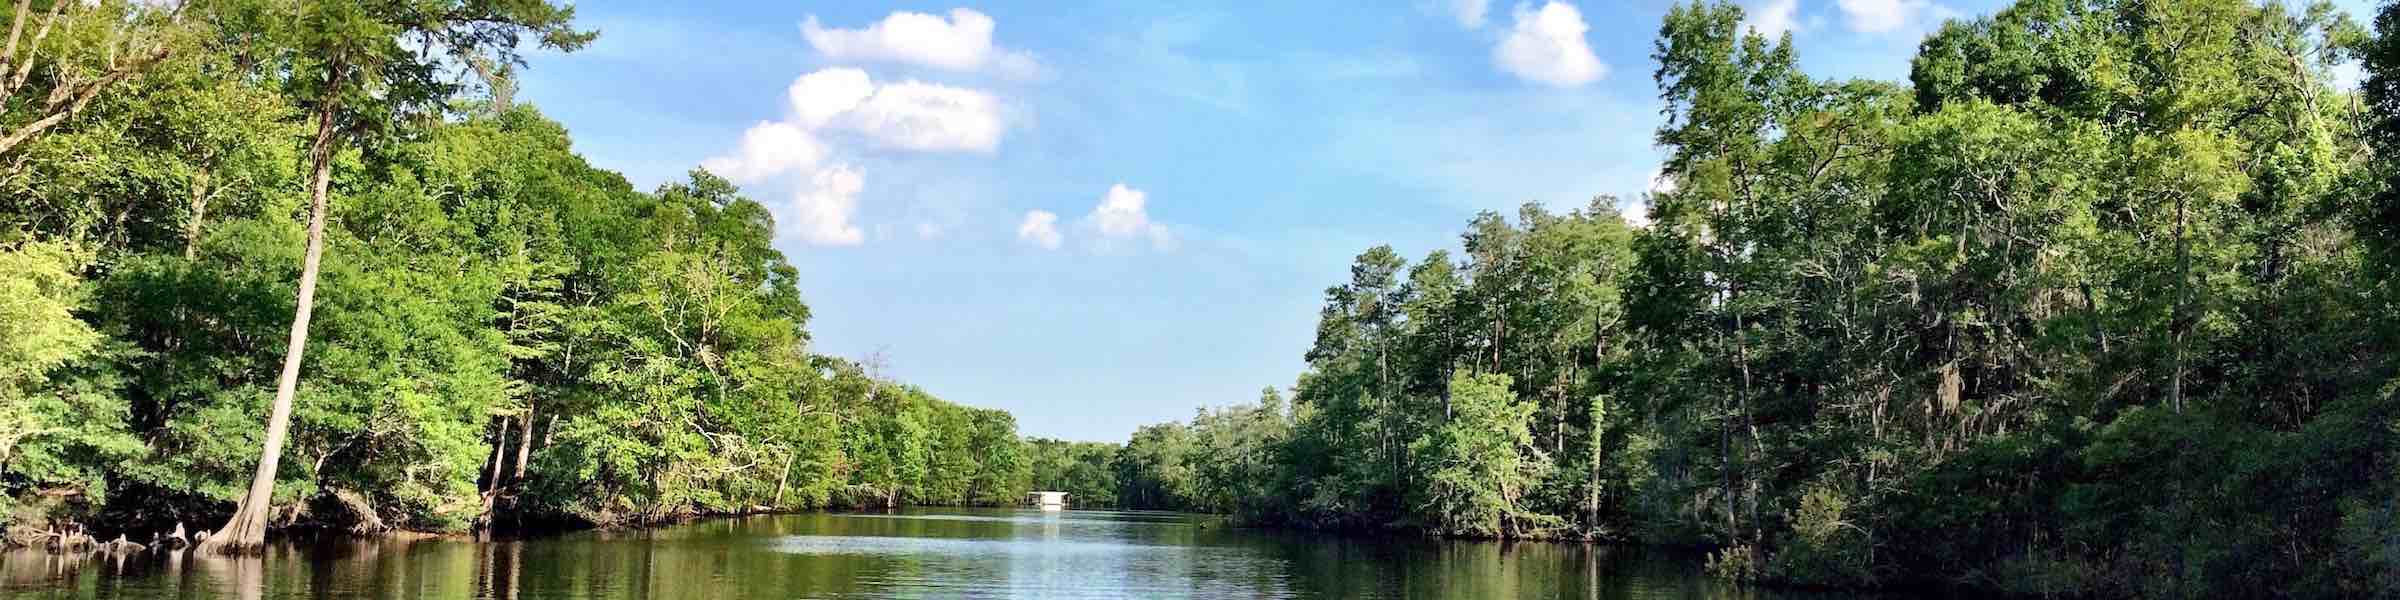 View of the Waccamaw River, near Myrtle Beach, SC.